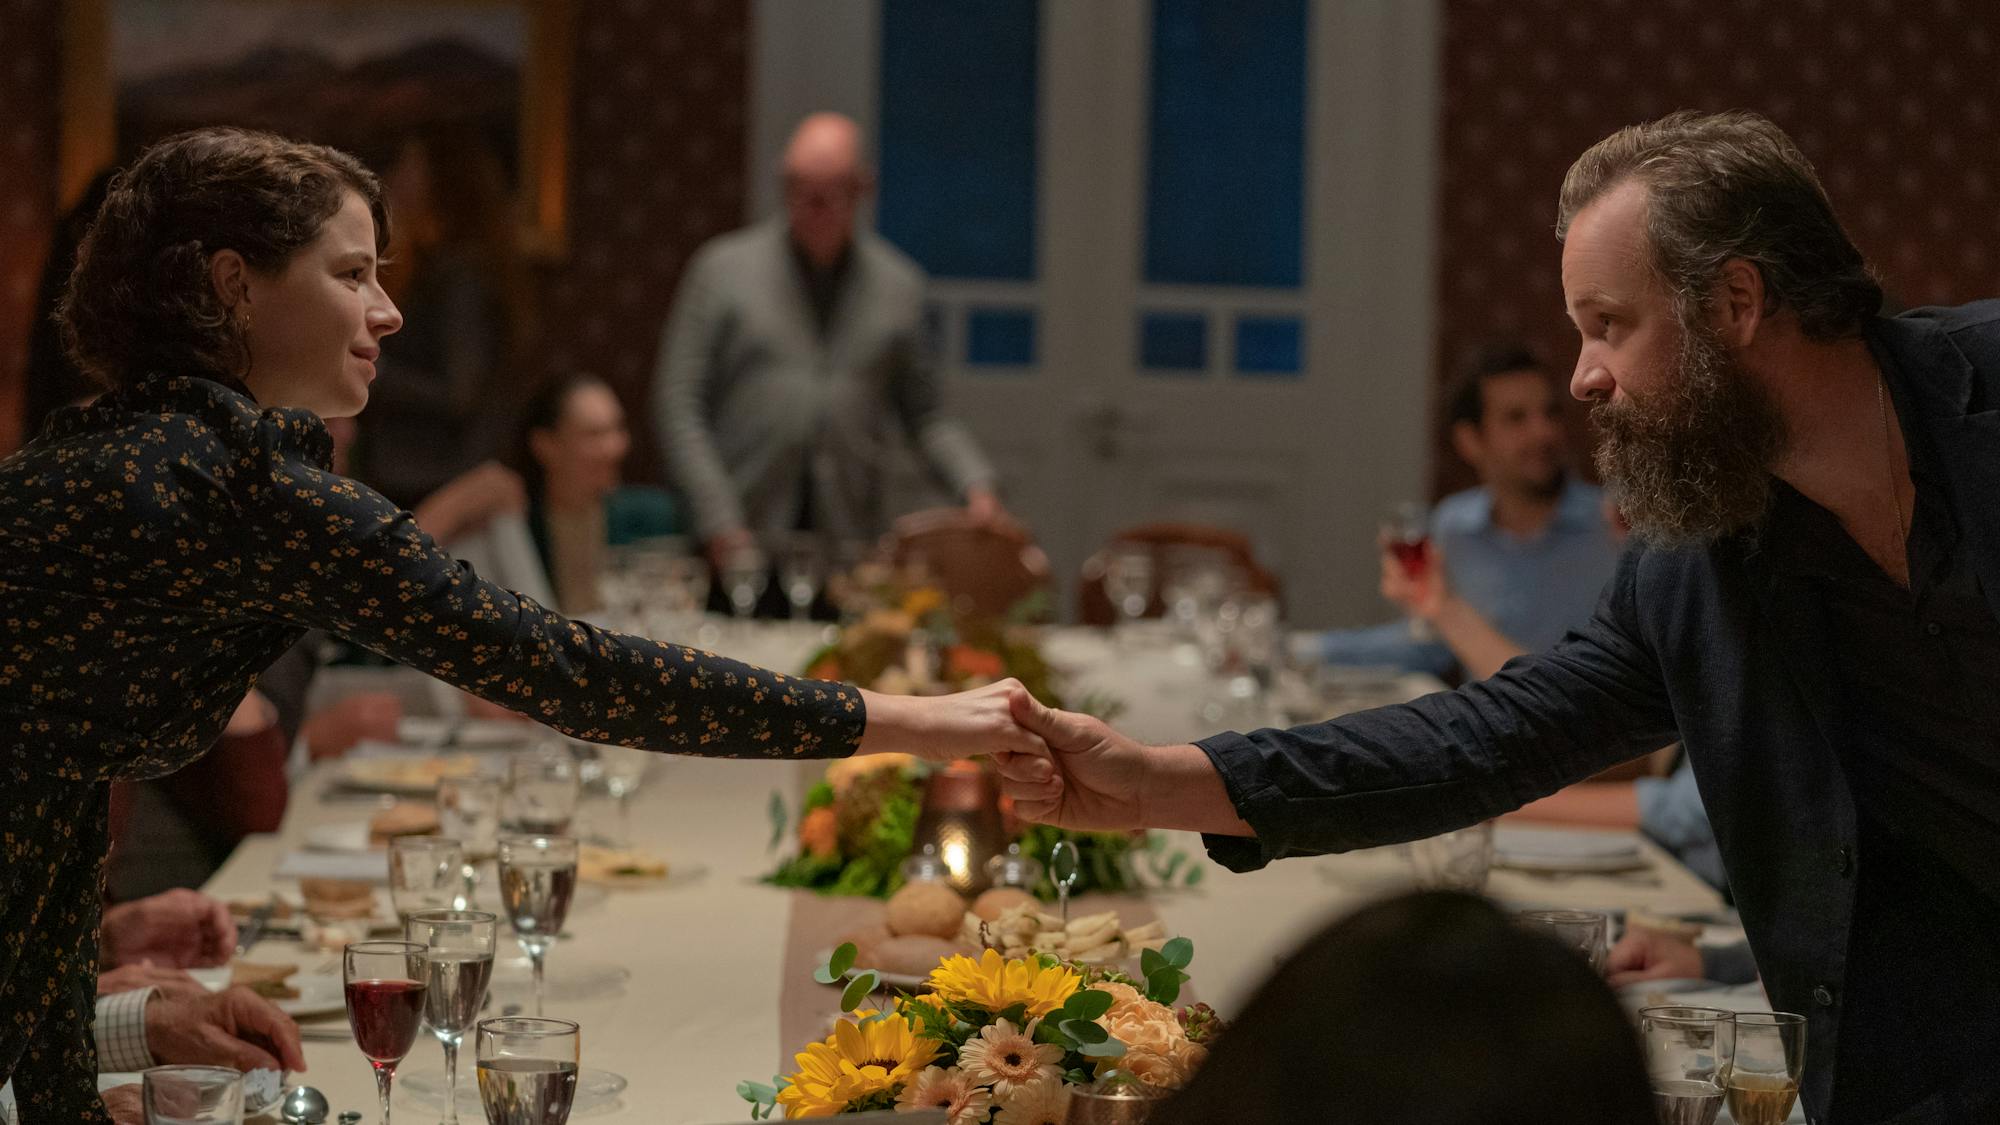 Jessie Buckley and Peter Sarsgaard shake hands over a table filled with cups, food, and flowers.